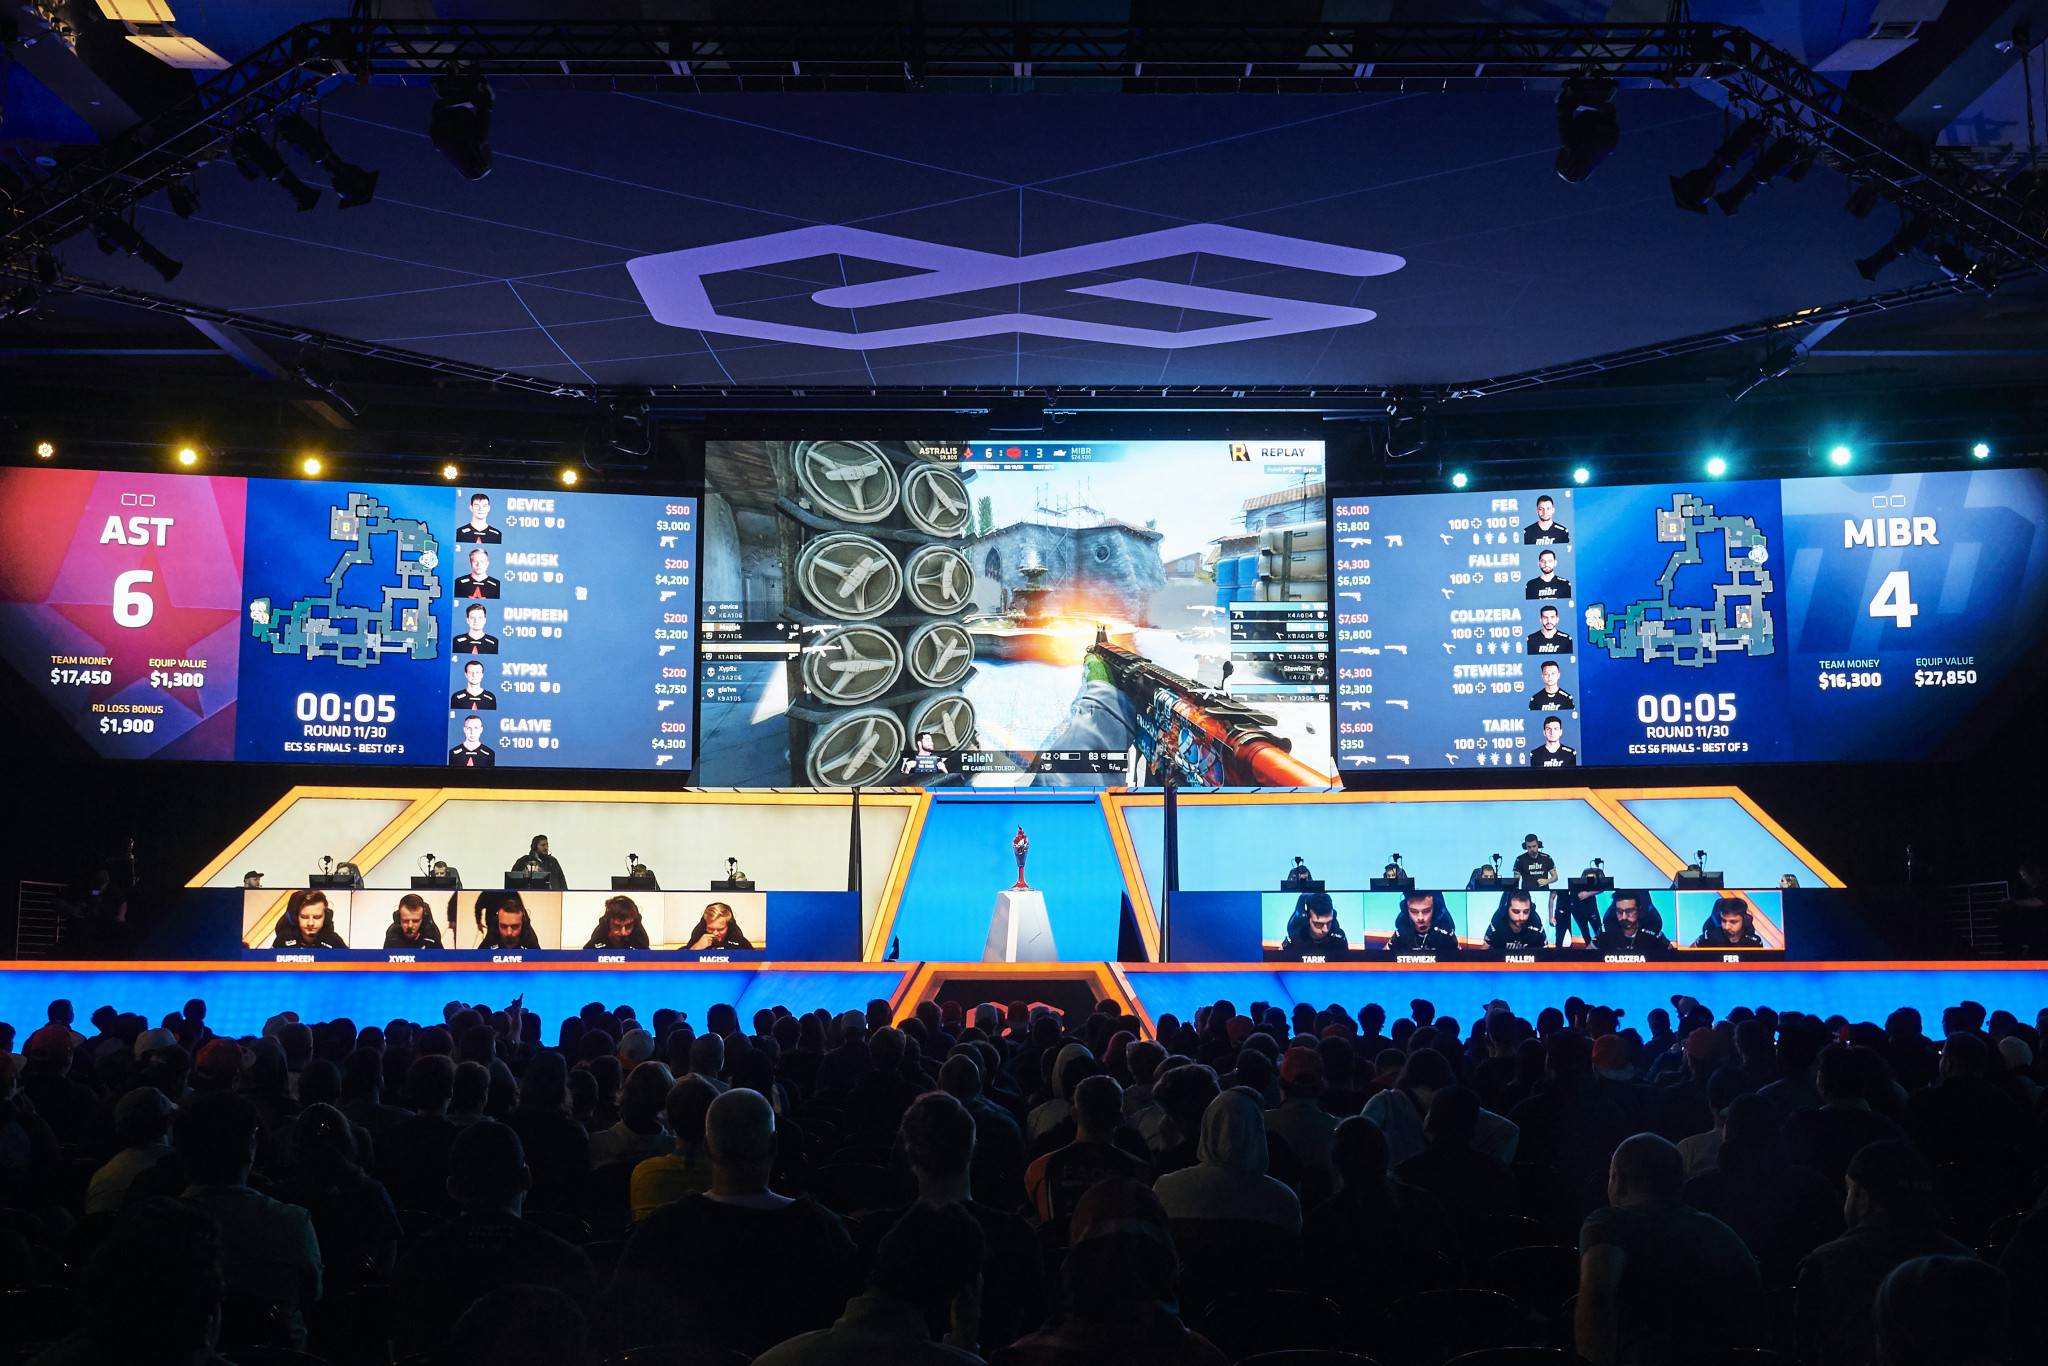 NCAA decide against organising and governing US college esports tournaments